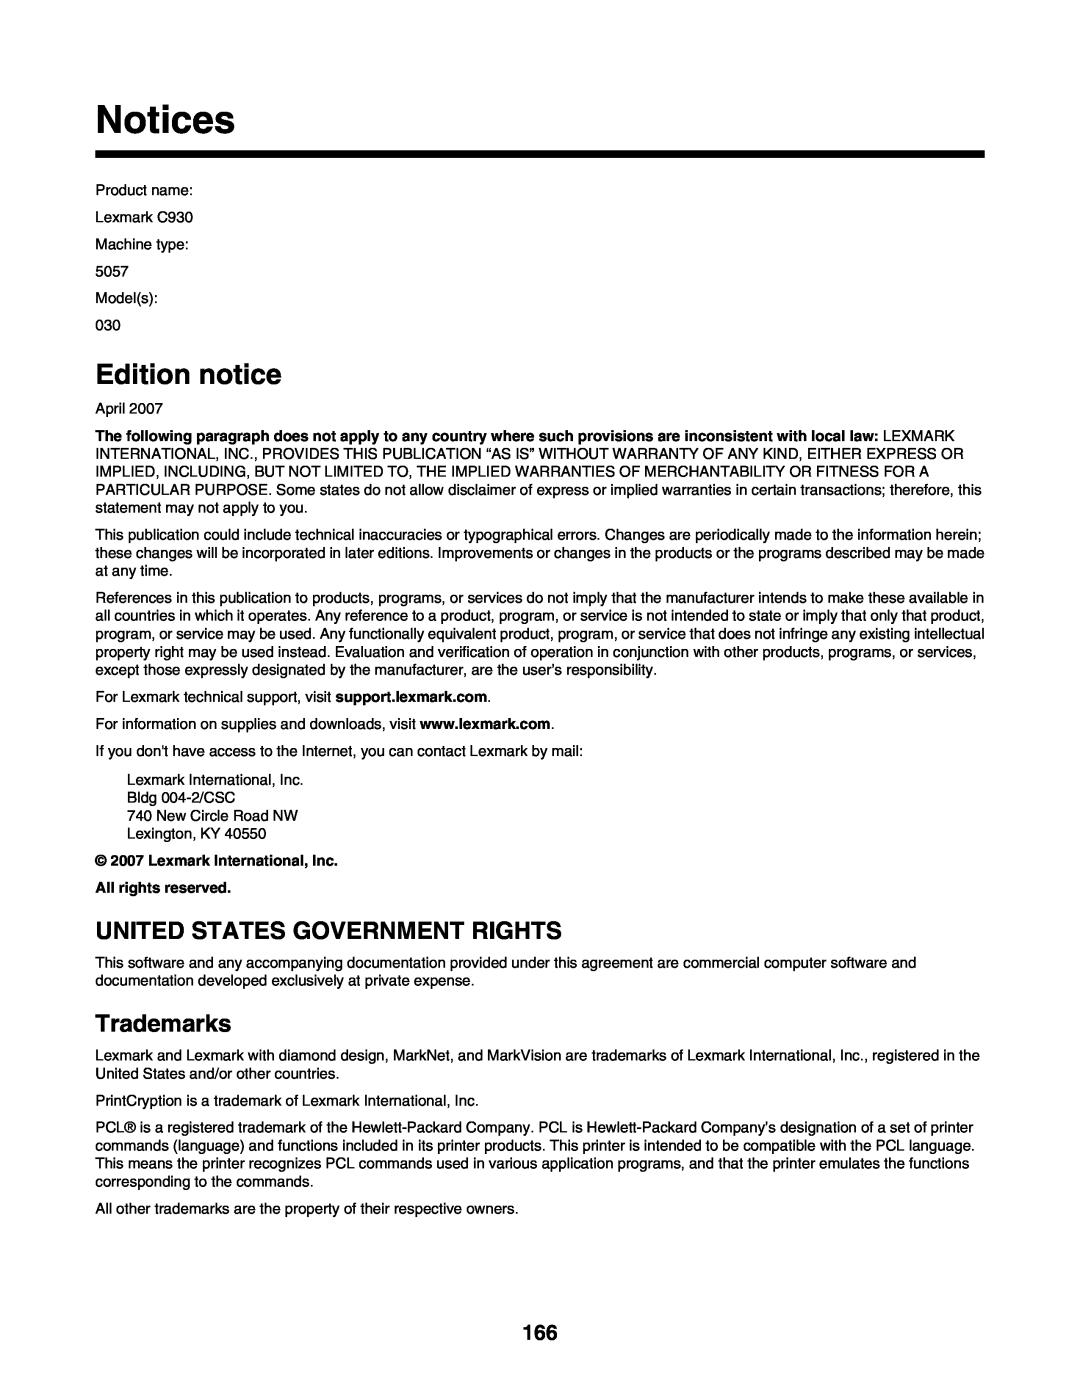 Lexmark C935 manual Notices, Edition notice, United States Government Rights, Trademarks 